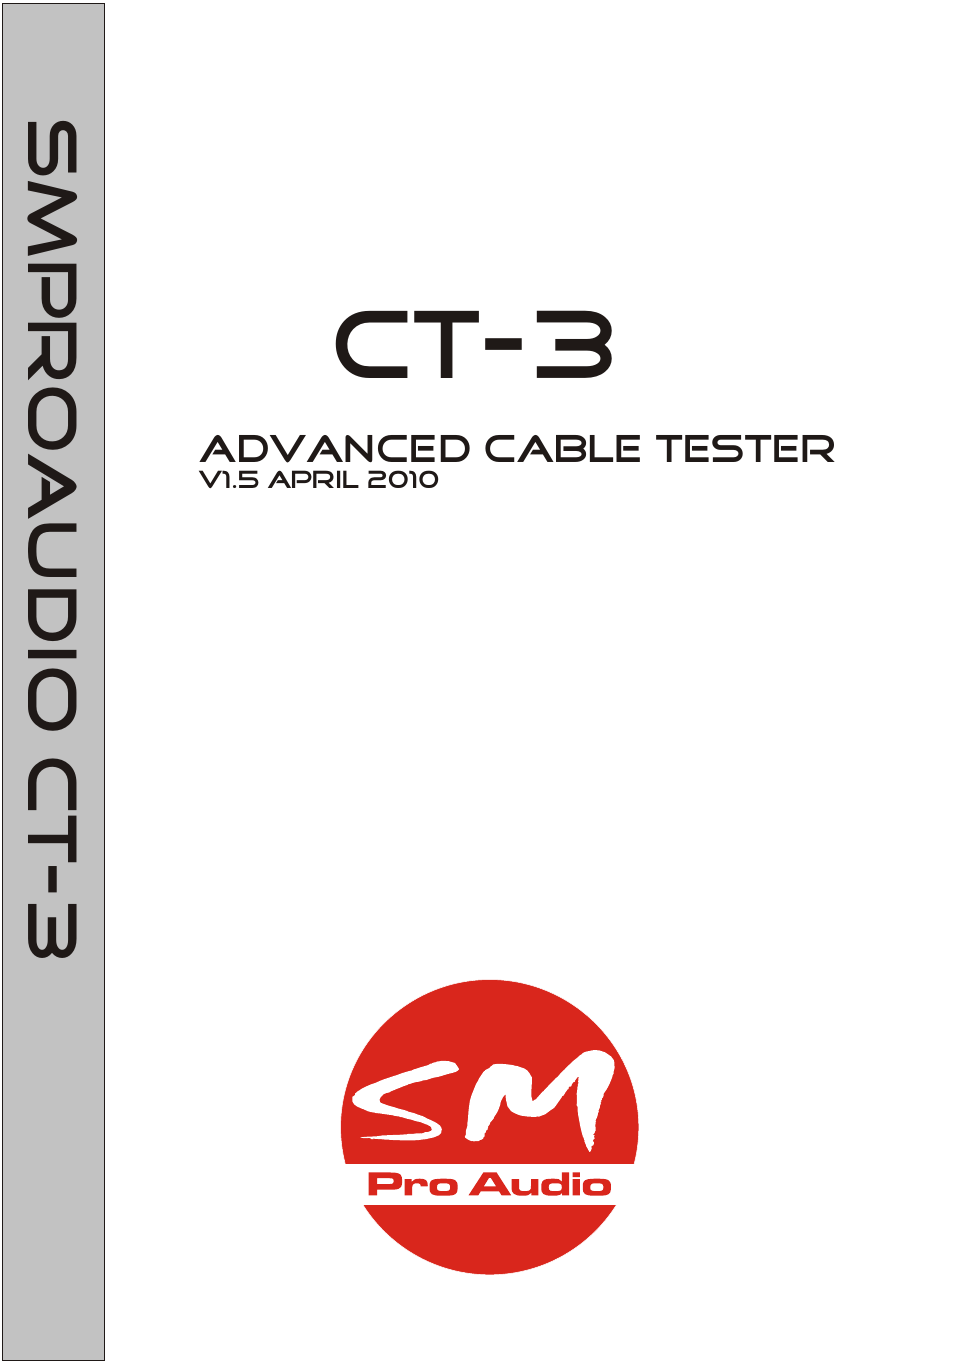 CT-3: Multi-format automatic Cable tester